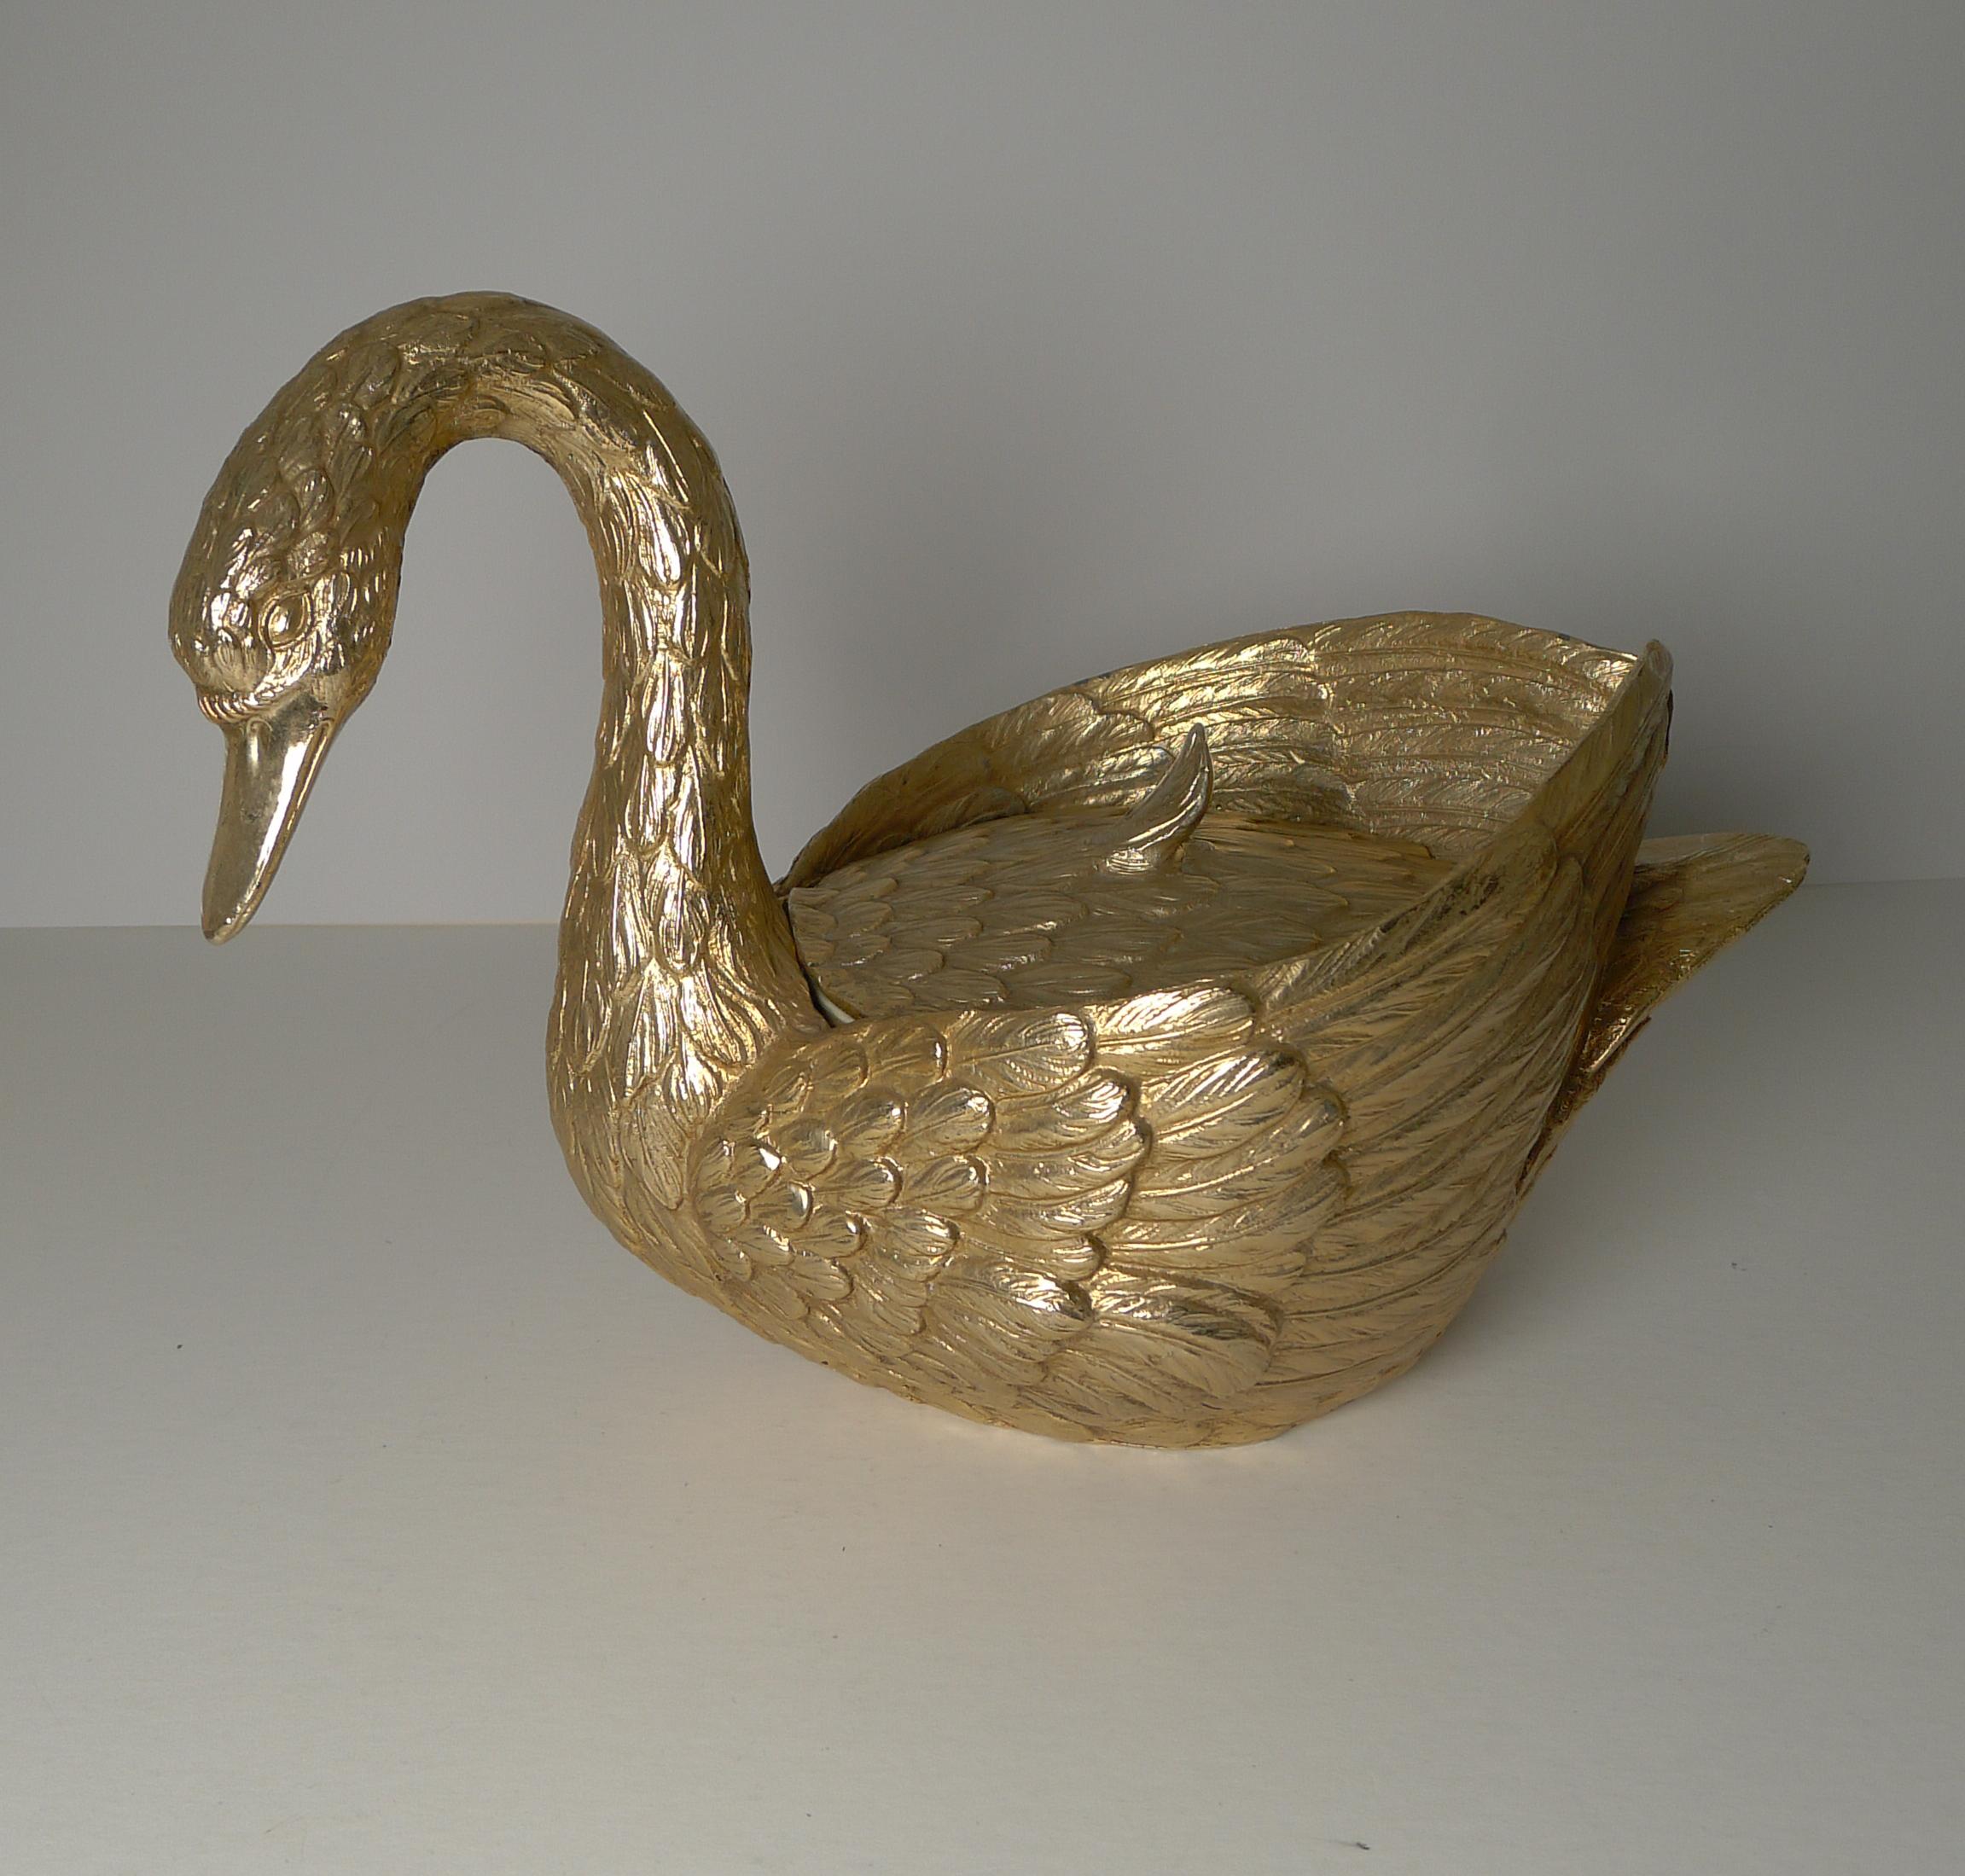 A magnificent and highly collectable Swan ice bucket and much rarer in the gilded gold finish than the more commonly seen silver colour.

The interior liner is the original and in excellent condition without damage. Signed on the underside, dating